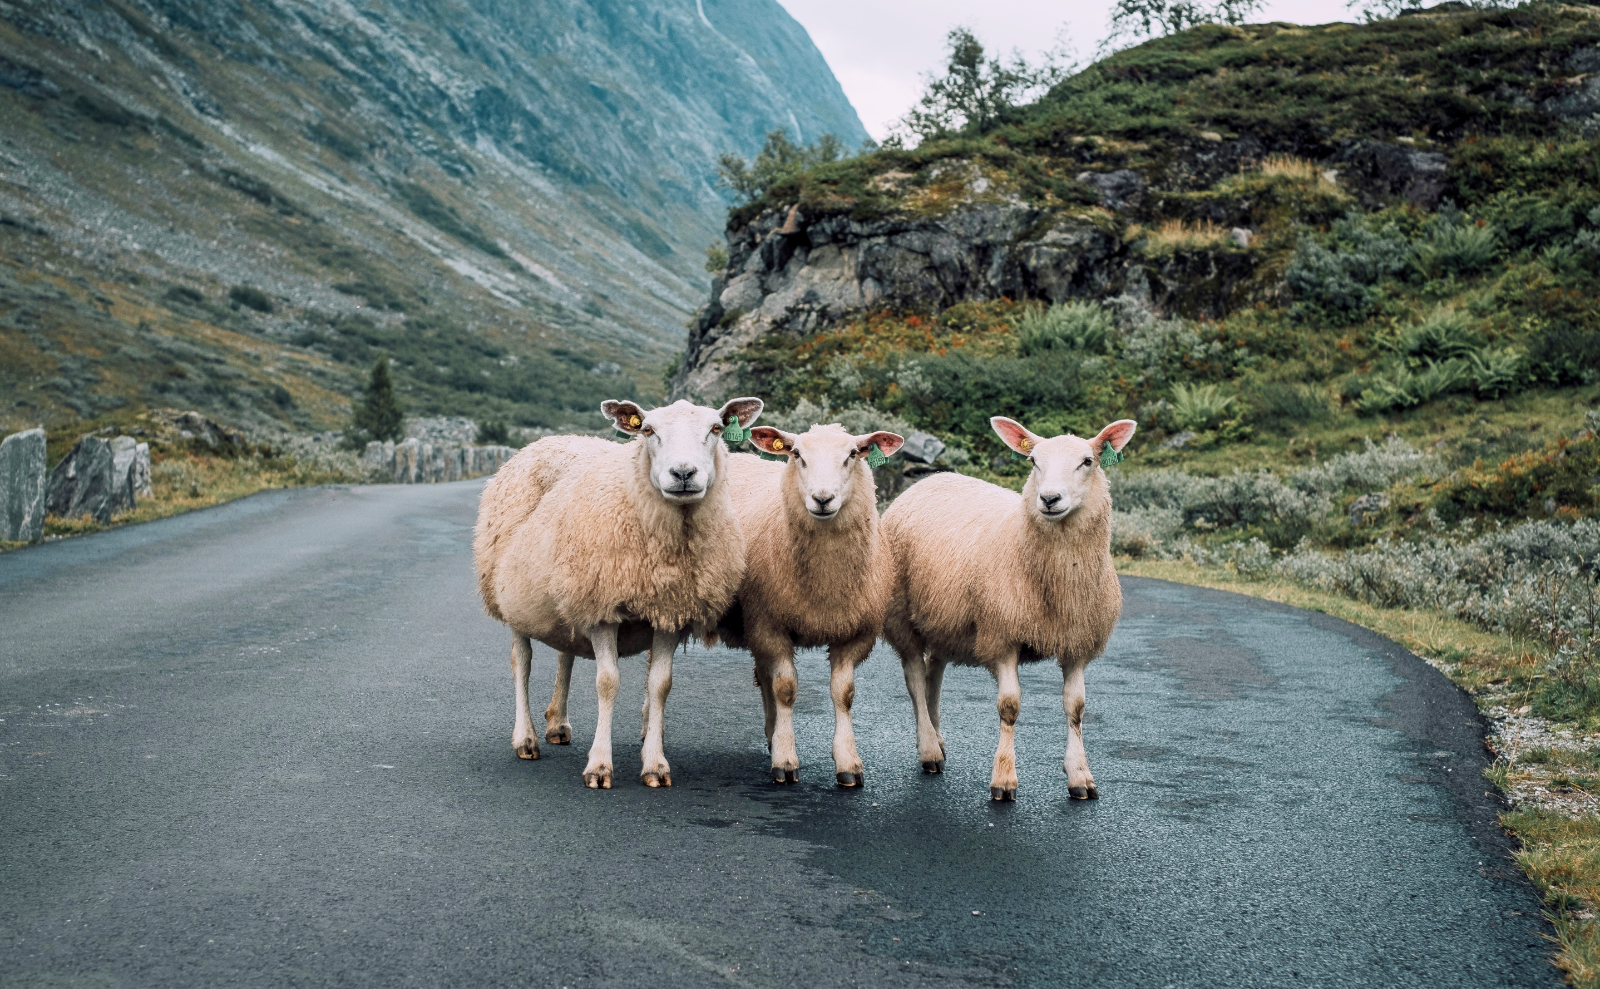 three sheep standing posing together on a rural road in norway